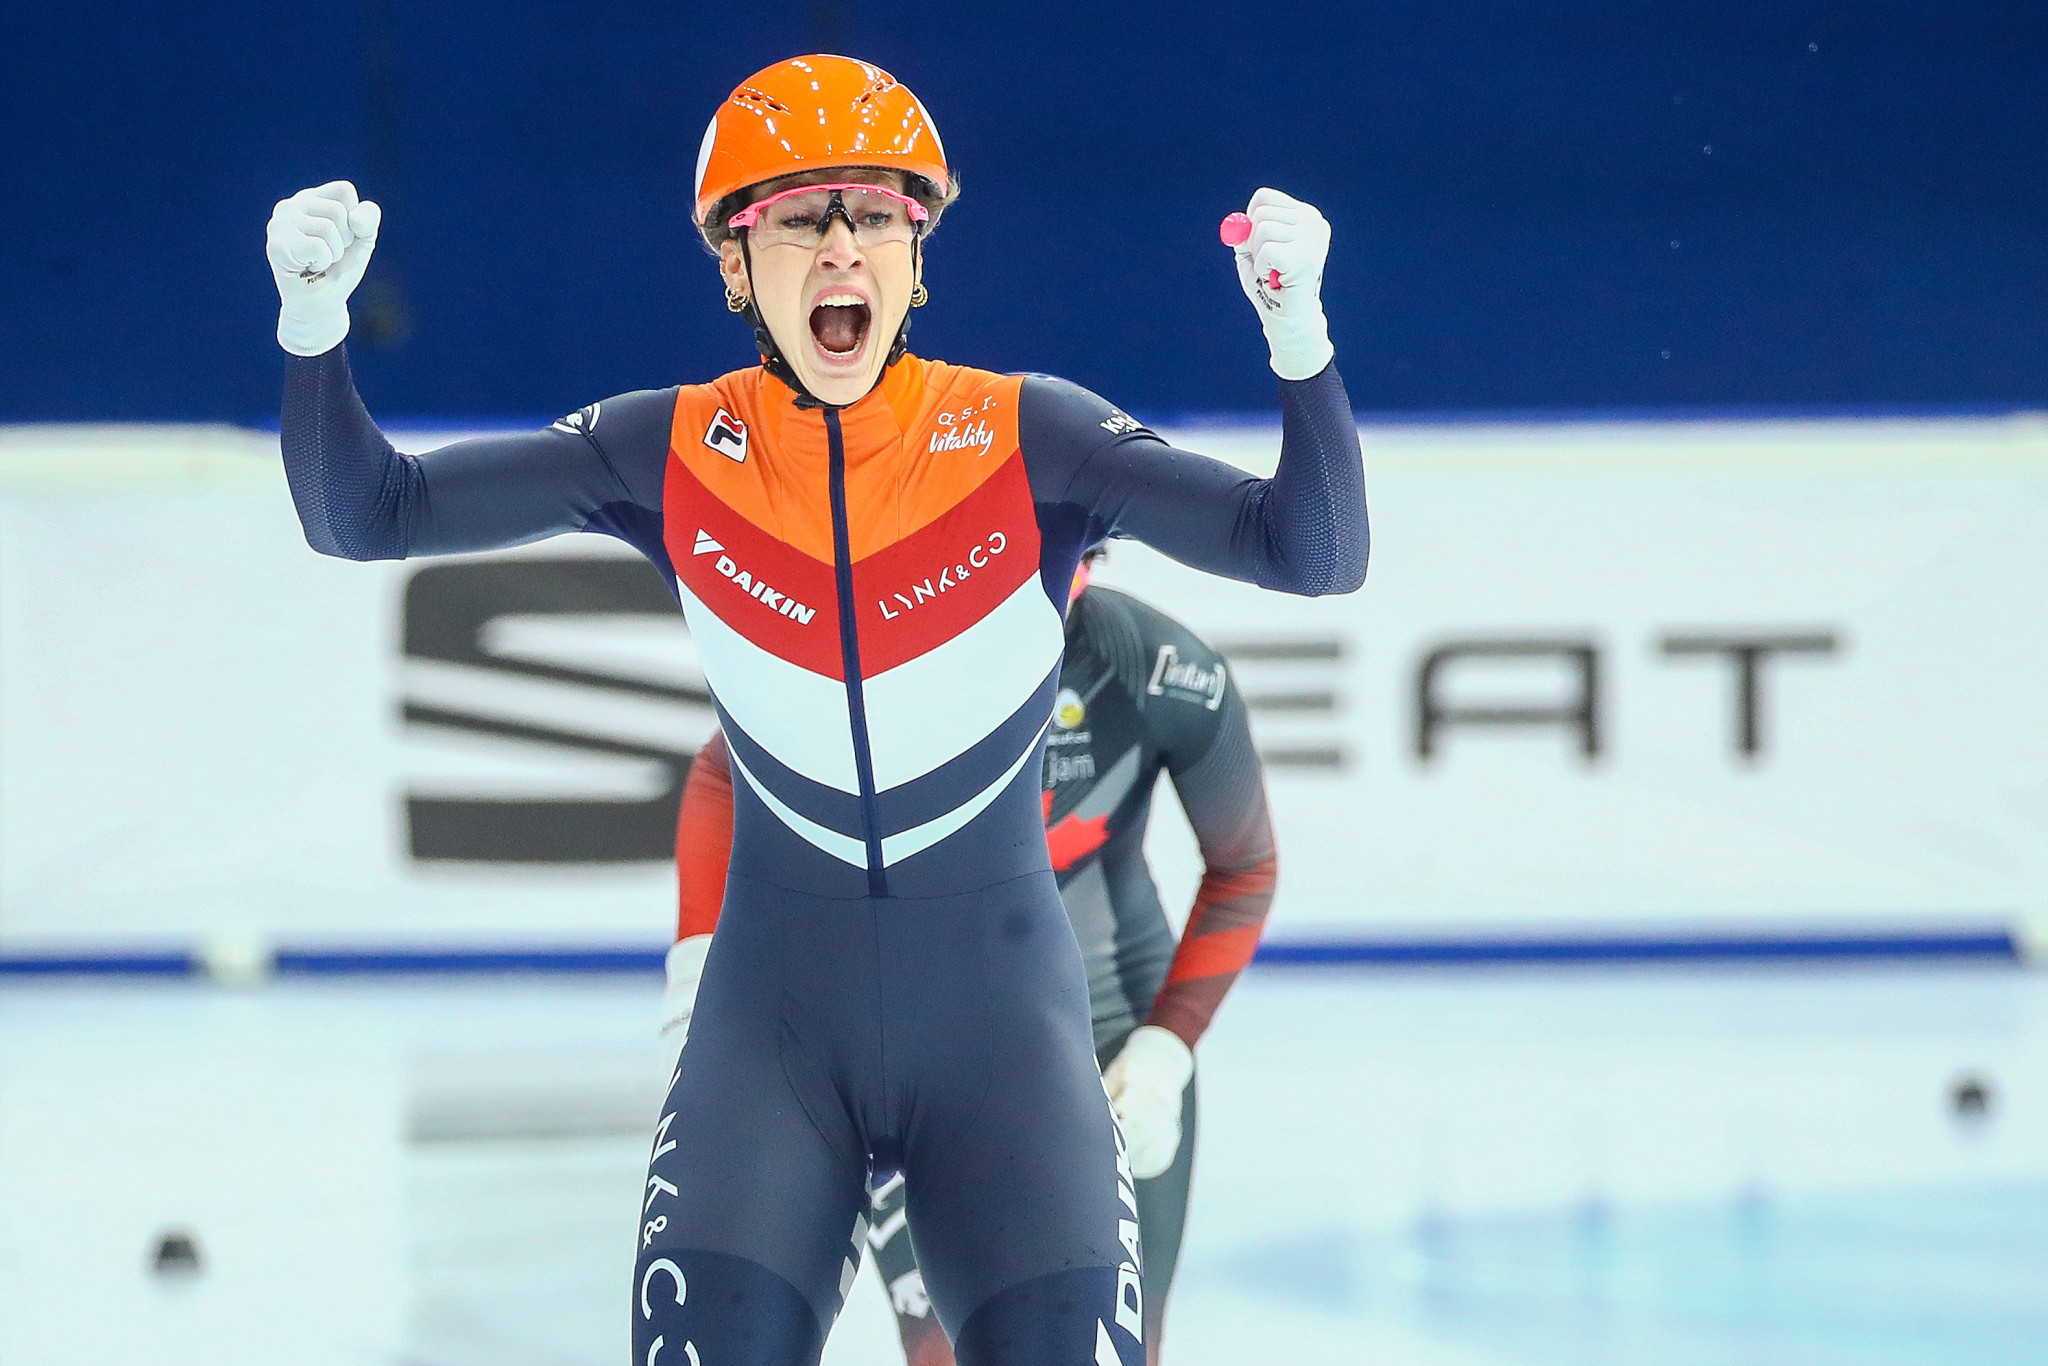 The Netherlands' Suzanne Schulting triumphed in the women's 500m, 1,000m and 1,500m individual events in Debrecen ©Getty Images